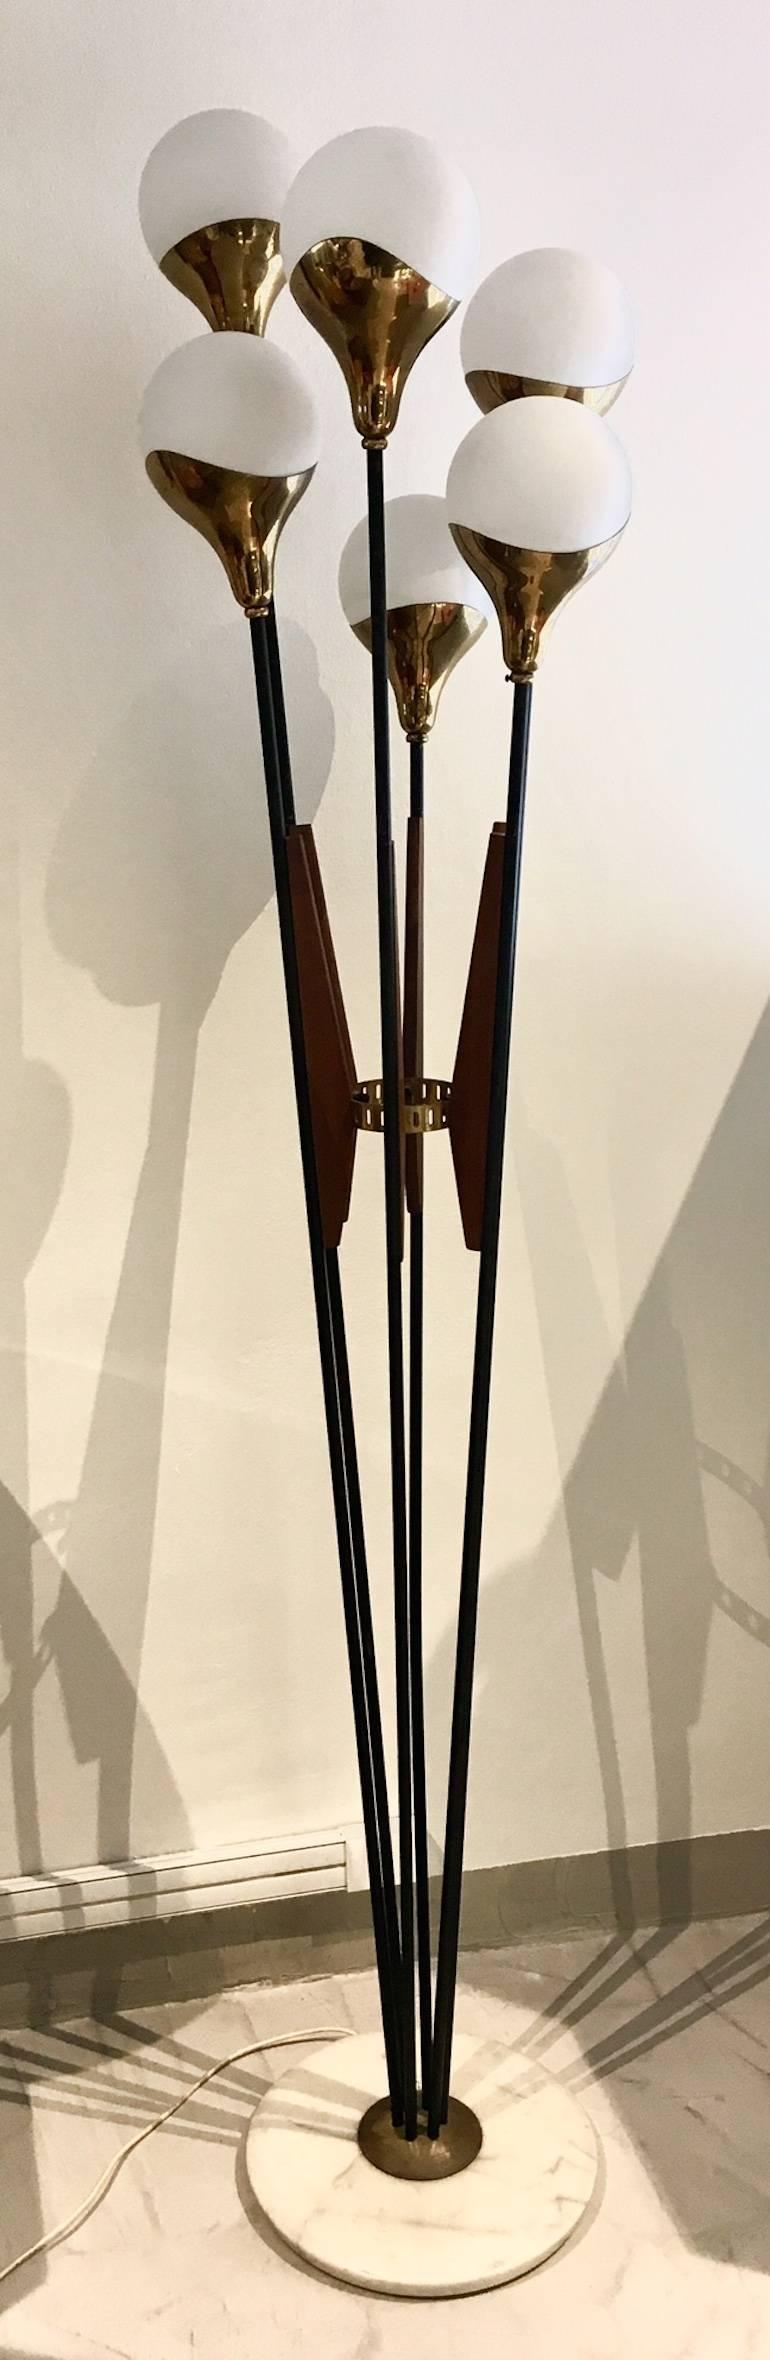 Elegant floor lamp with six lights produced by Stilnovo, Italy. Brass, varnished metal, white glass, wood. Marble base. Please note that there is a small dent in the base, pictured.